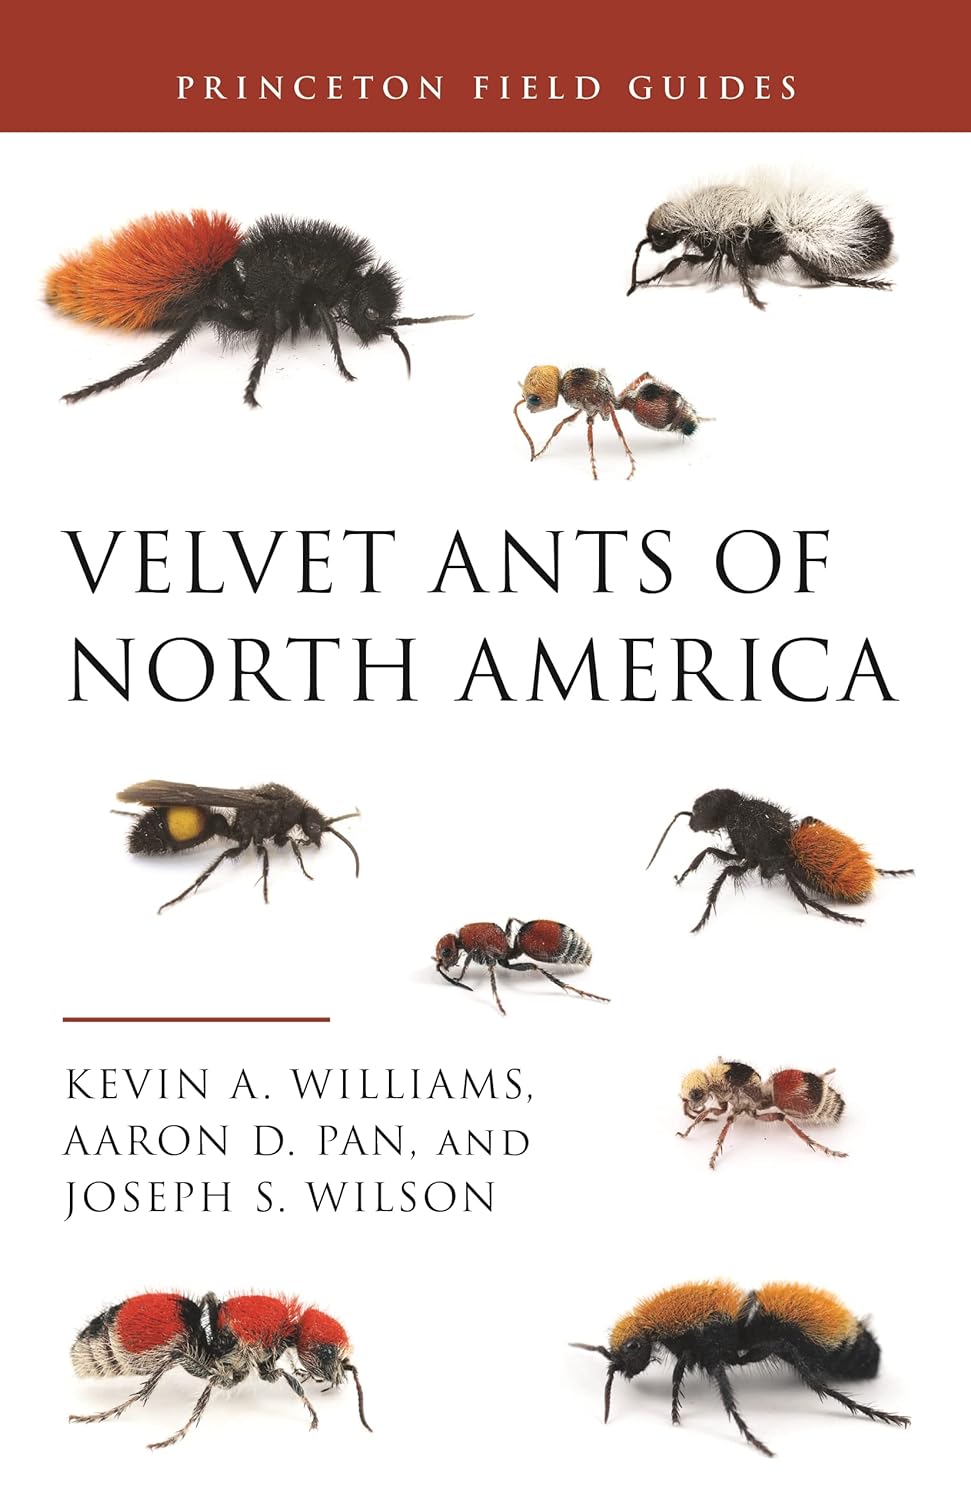 VELVET ANTS OF NORTH AMERICA by Kevin Williams, Aaron D. Pan, and Joseph S. Wilson